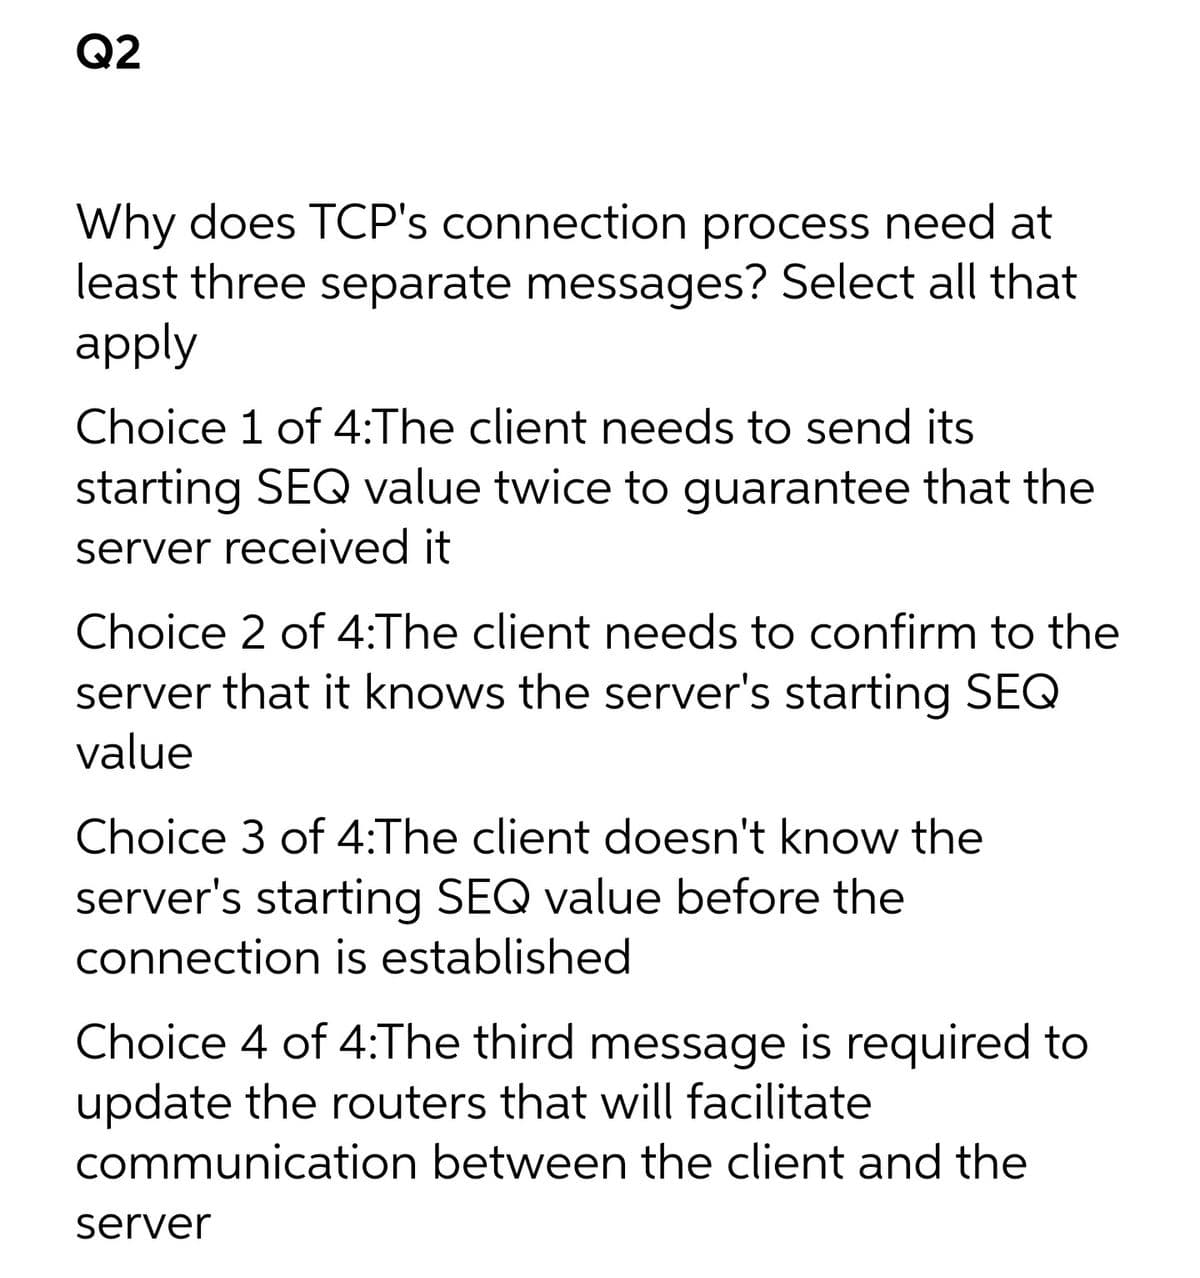 Q2
Why does TCP's connection process need at
least three separate messages? Select all that
apply
Choice 1 of 4:The client needs to send its
starting SEQ value twice to guarantee that the
server received it
Choice 2 of 4:The client needs to confirm to the
server that it knows the server's starting SEQ
value
Choice 3 of 4:The client doesn't know the
server's starting SEQ value before the
connection is established
Choice 4 of 4:The third message is required to
update the routers that will facilitate
communication between the client and the
server
